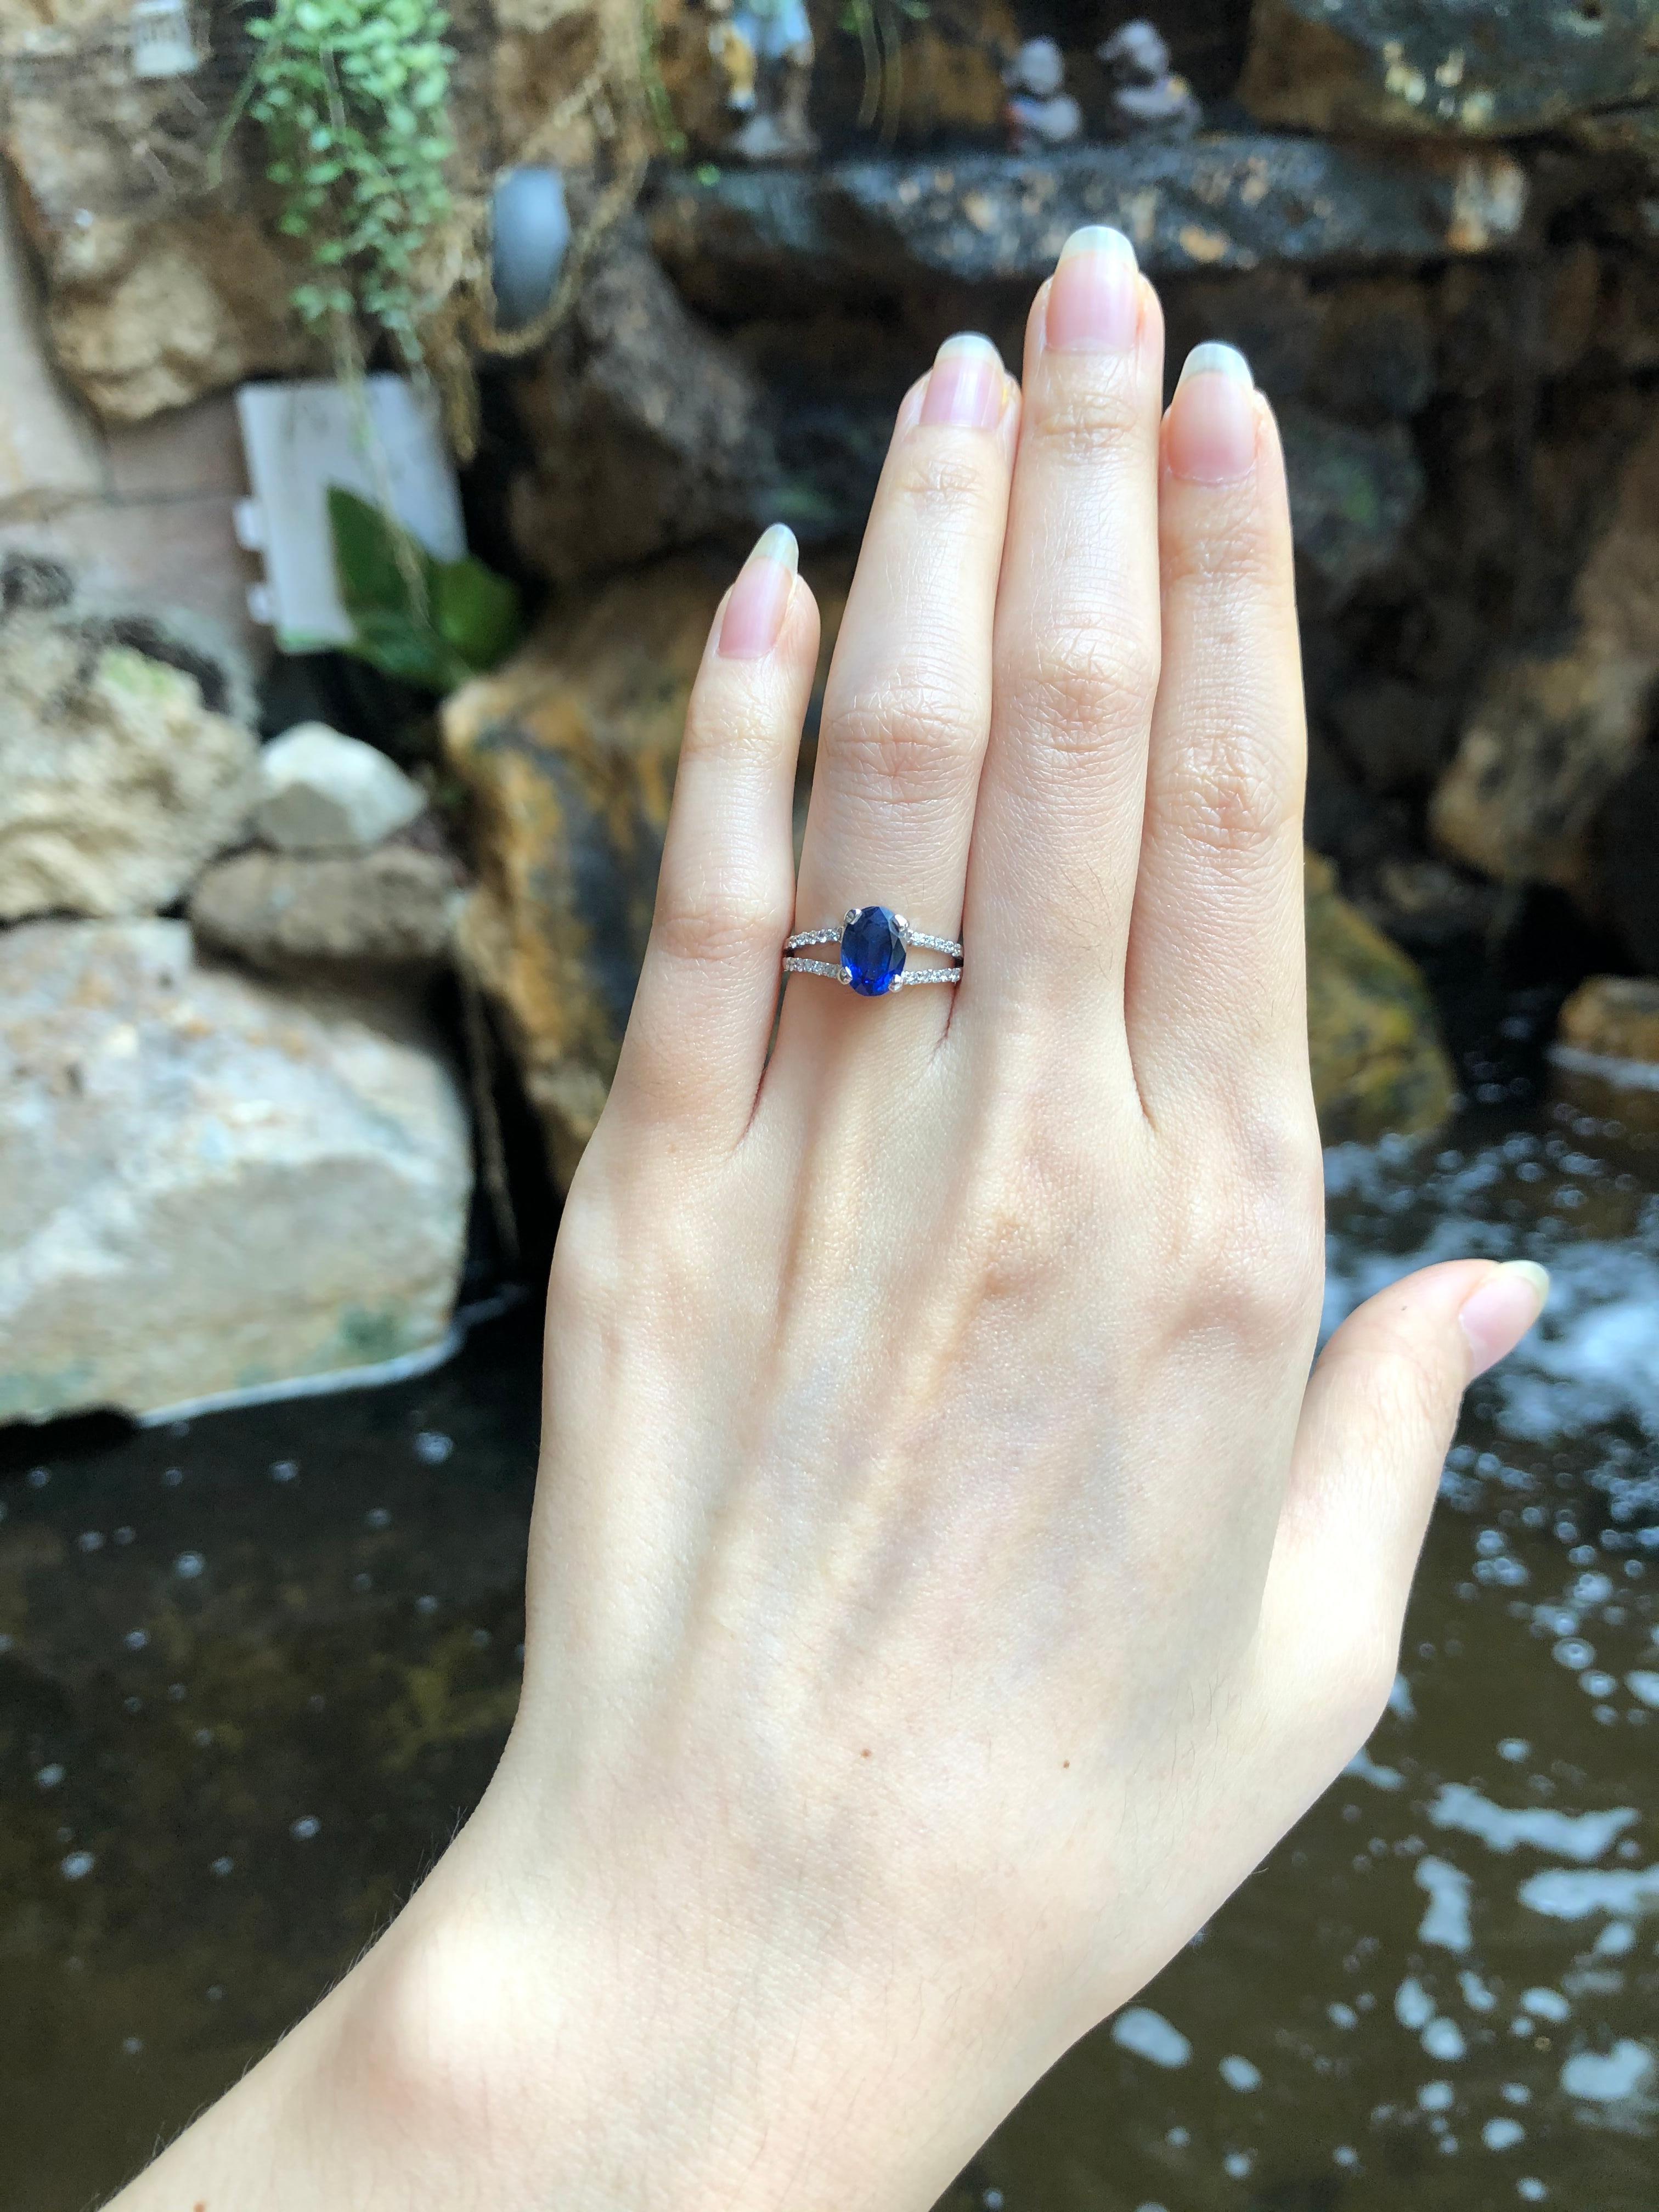 Blue Sapphire 1.62 carats with Diamond 0.14 carat Ring set in 18 Karat White Gold Settings

Width:  0.6 cm 
Length: 0.8 cm
Ring Size: 48
Total Weight: 3.0 grams

